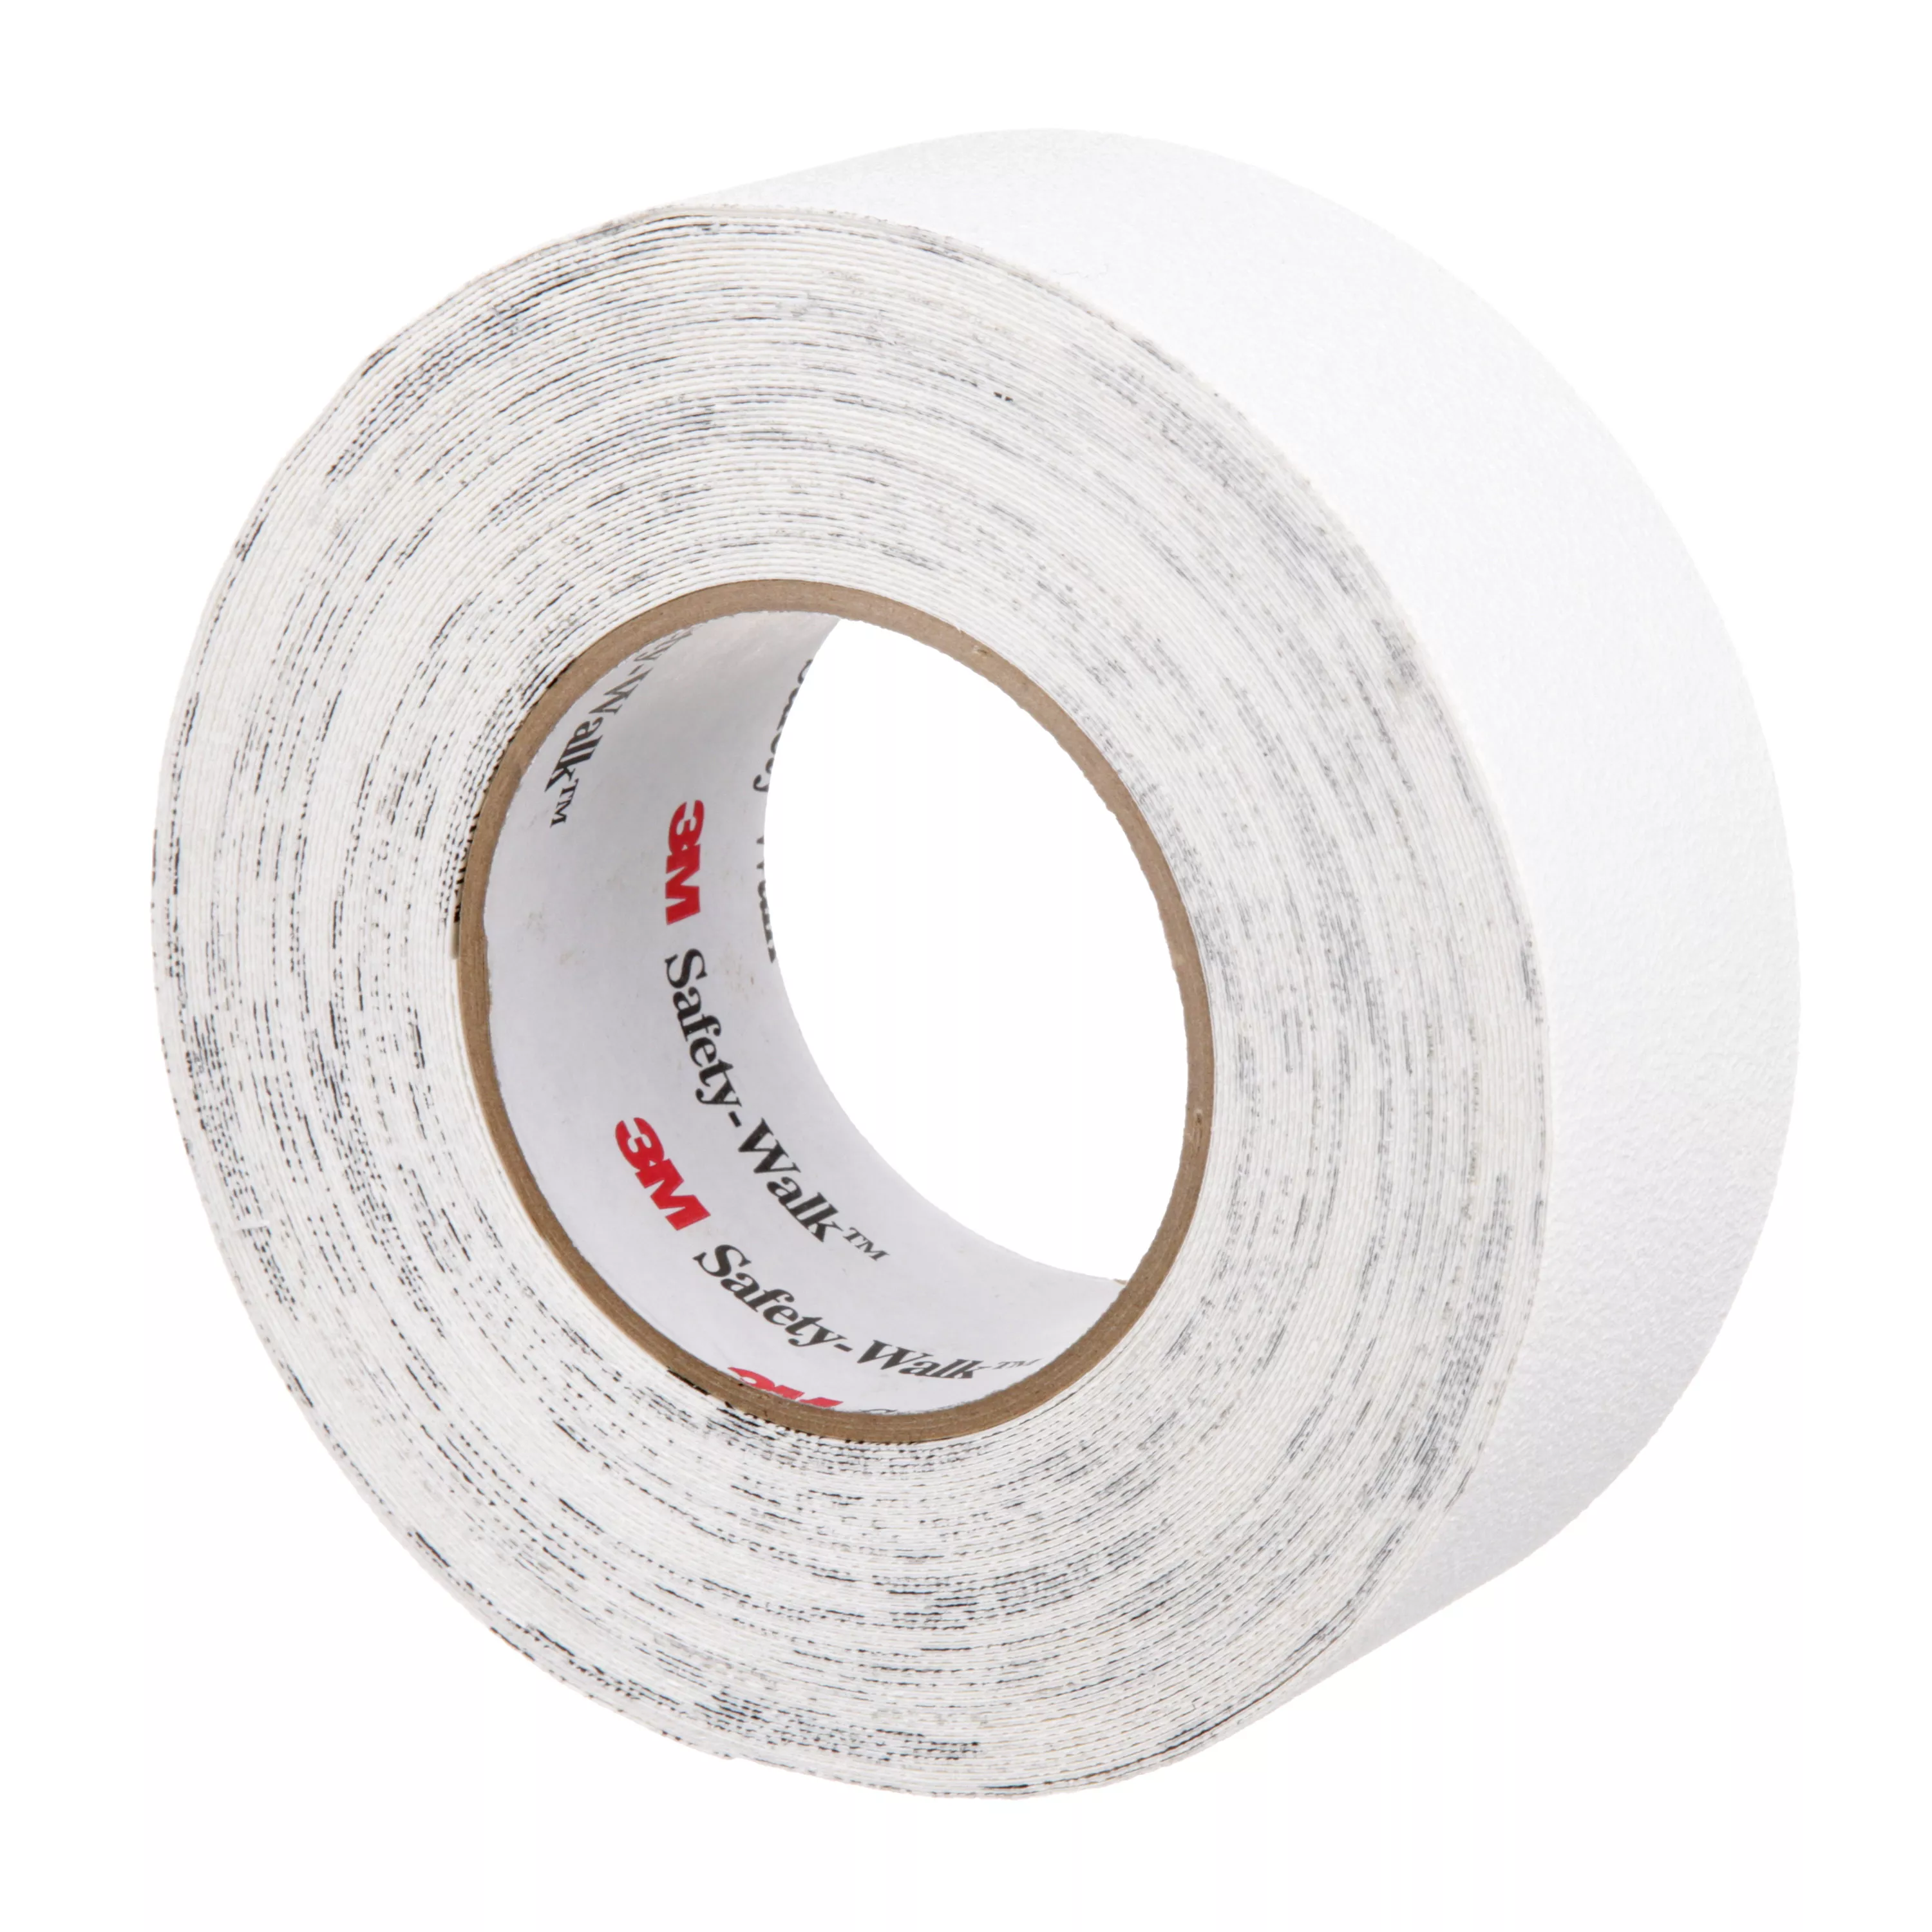 Product Number 280 | 3M™ Safety-Walk™ Slip-Resistant Fine Resilient Tapes & Treads 280